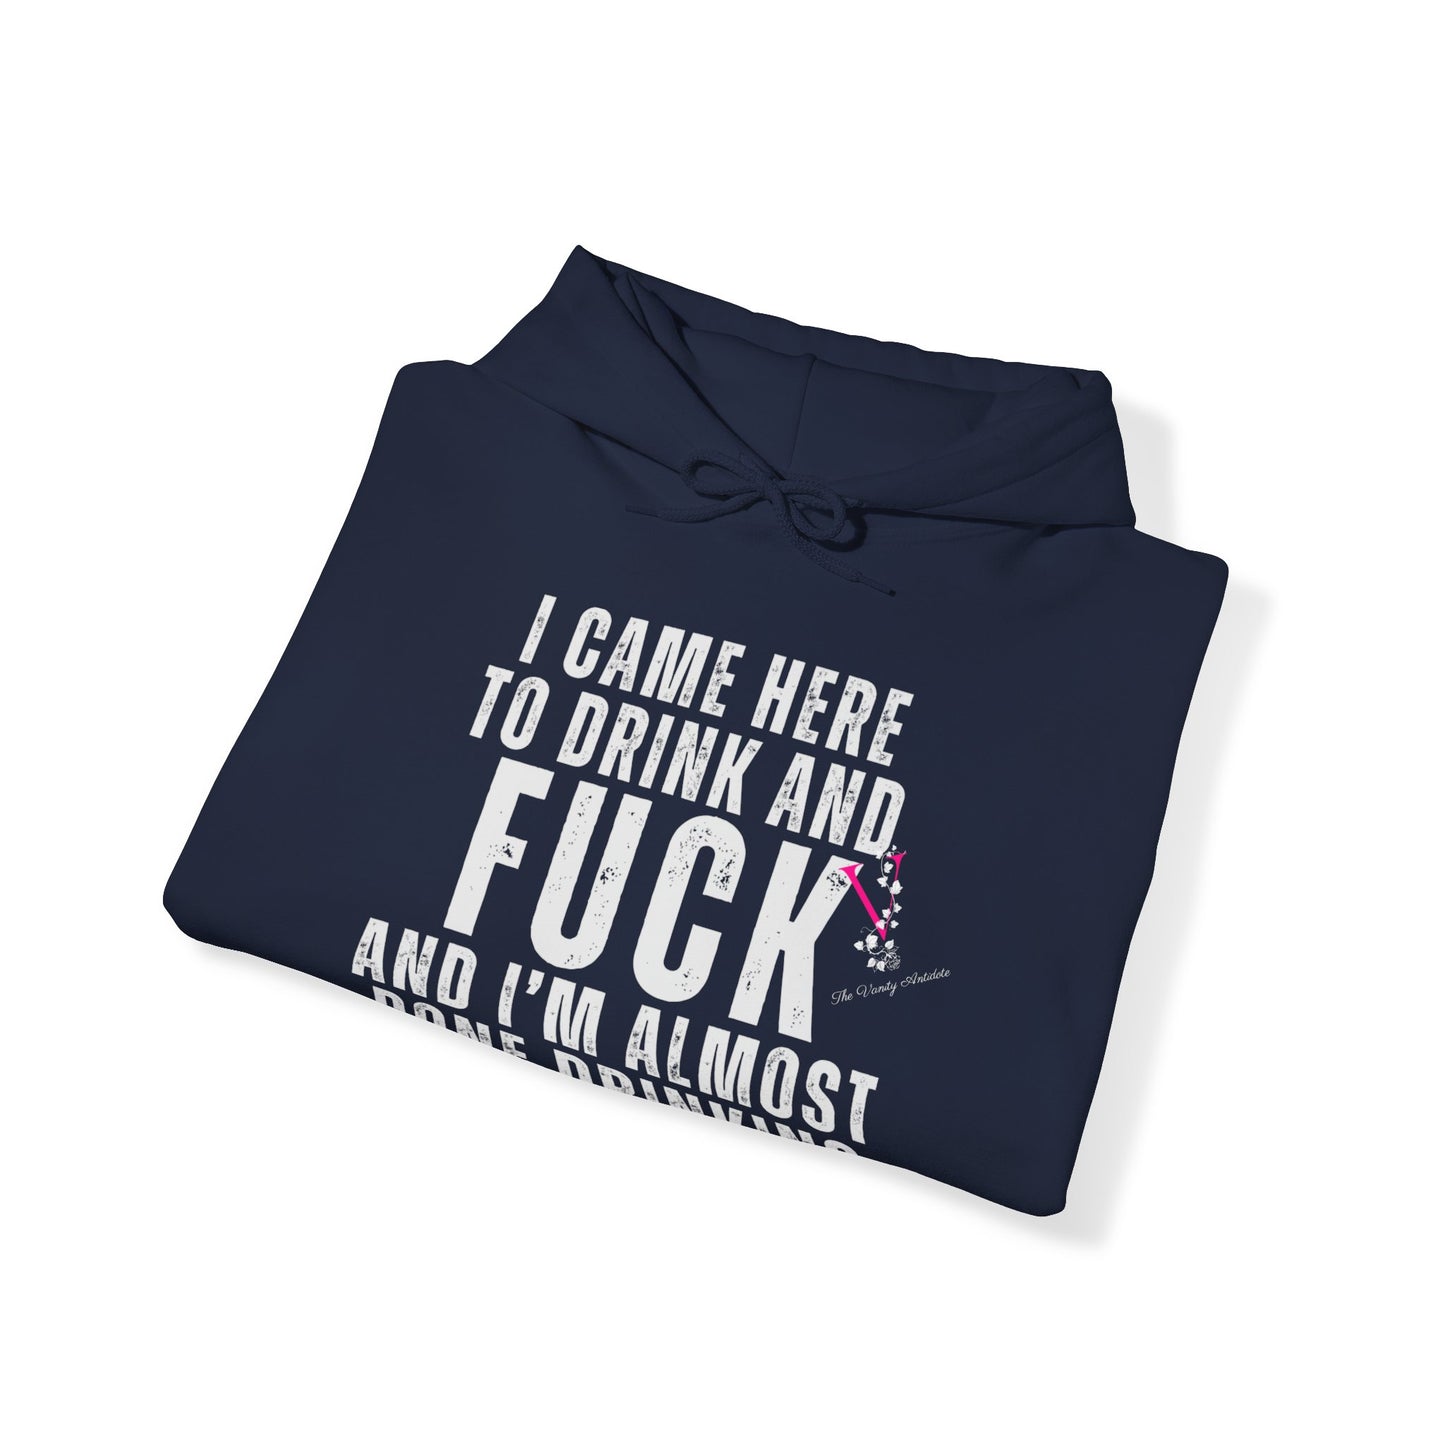 I CAME TO DRINK: Unisex Heavy Blend™ Hooded Sweatshirt